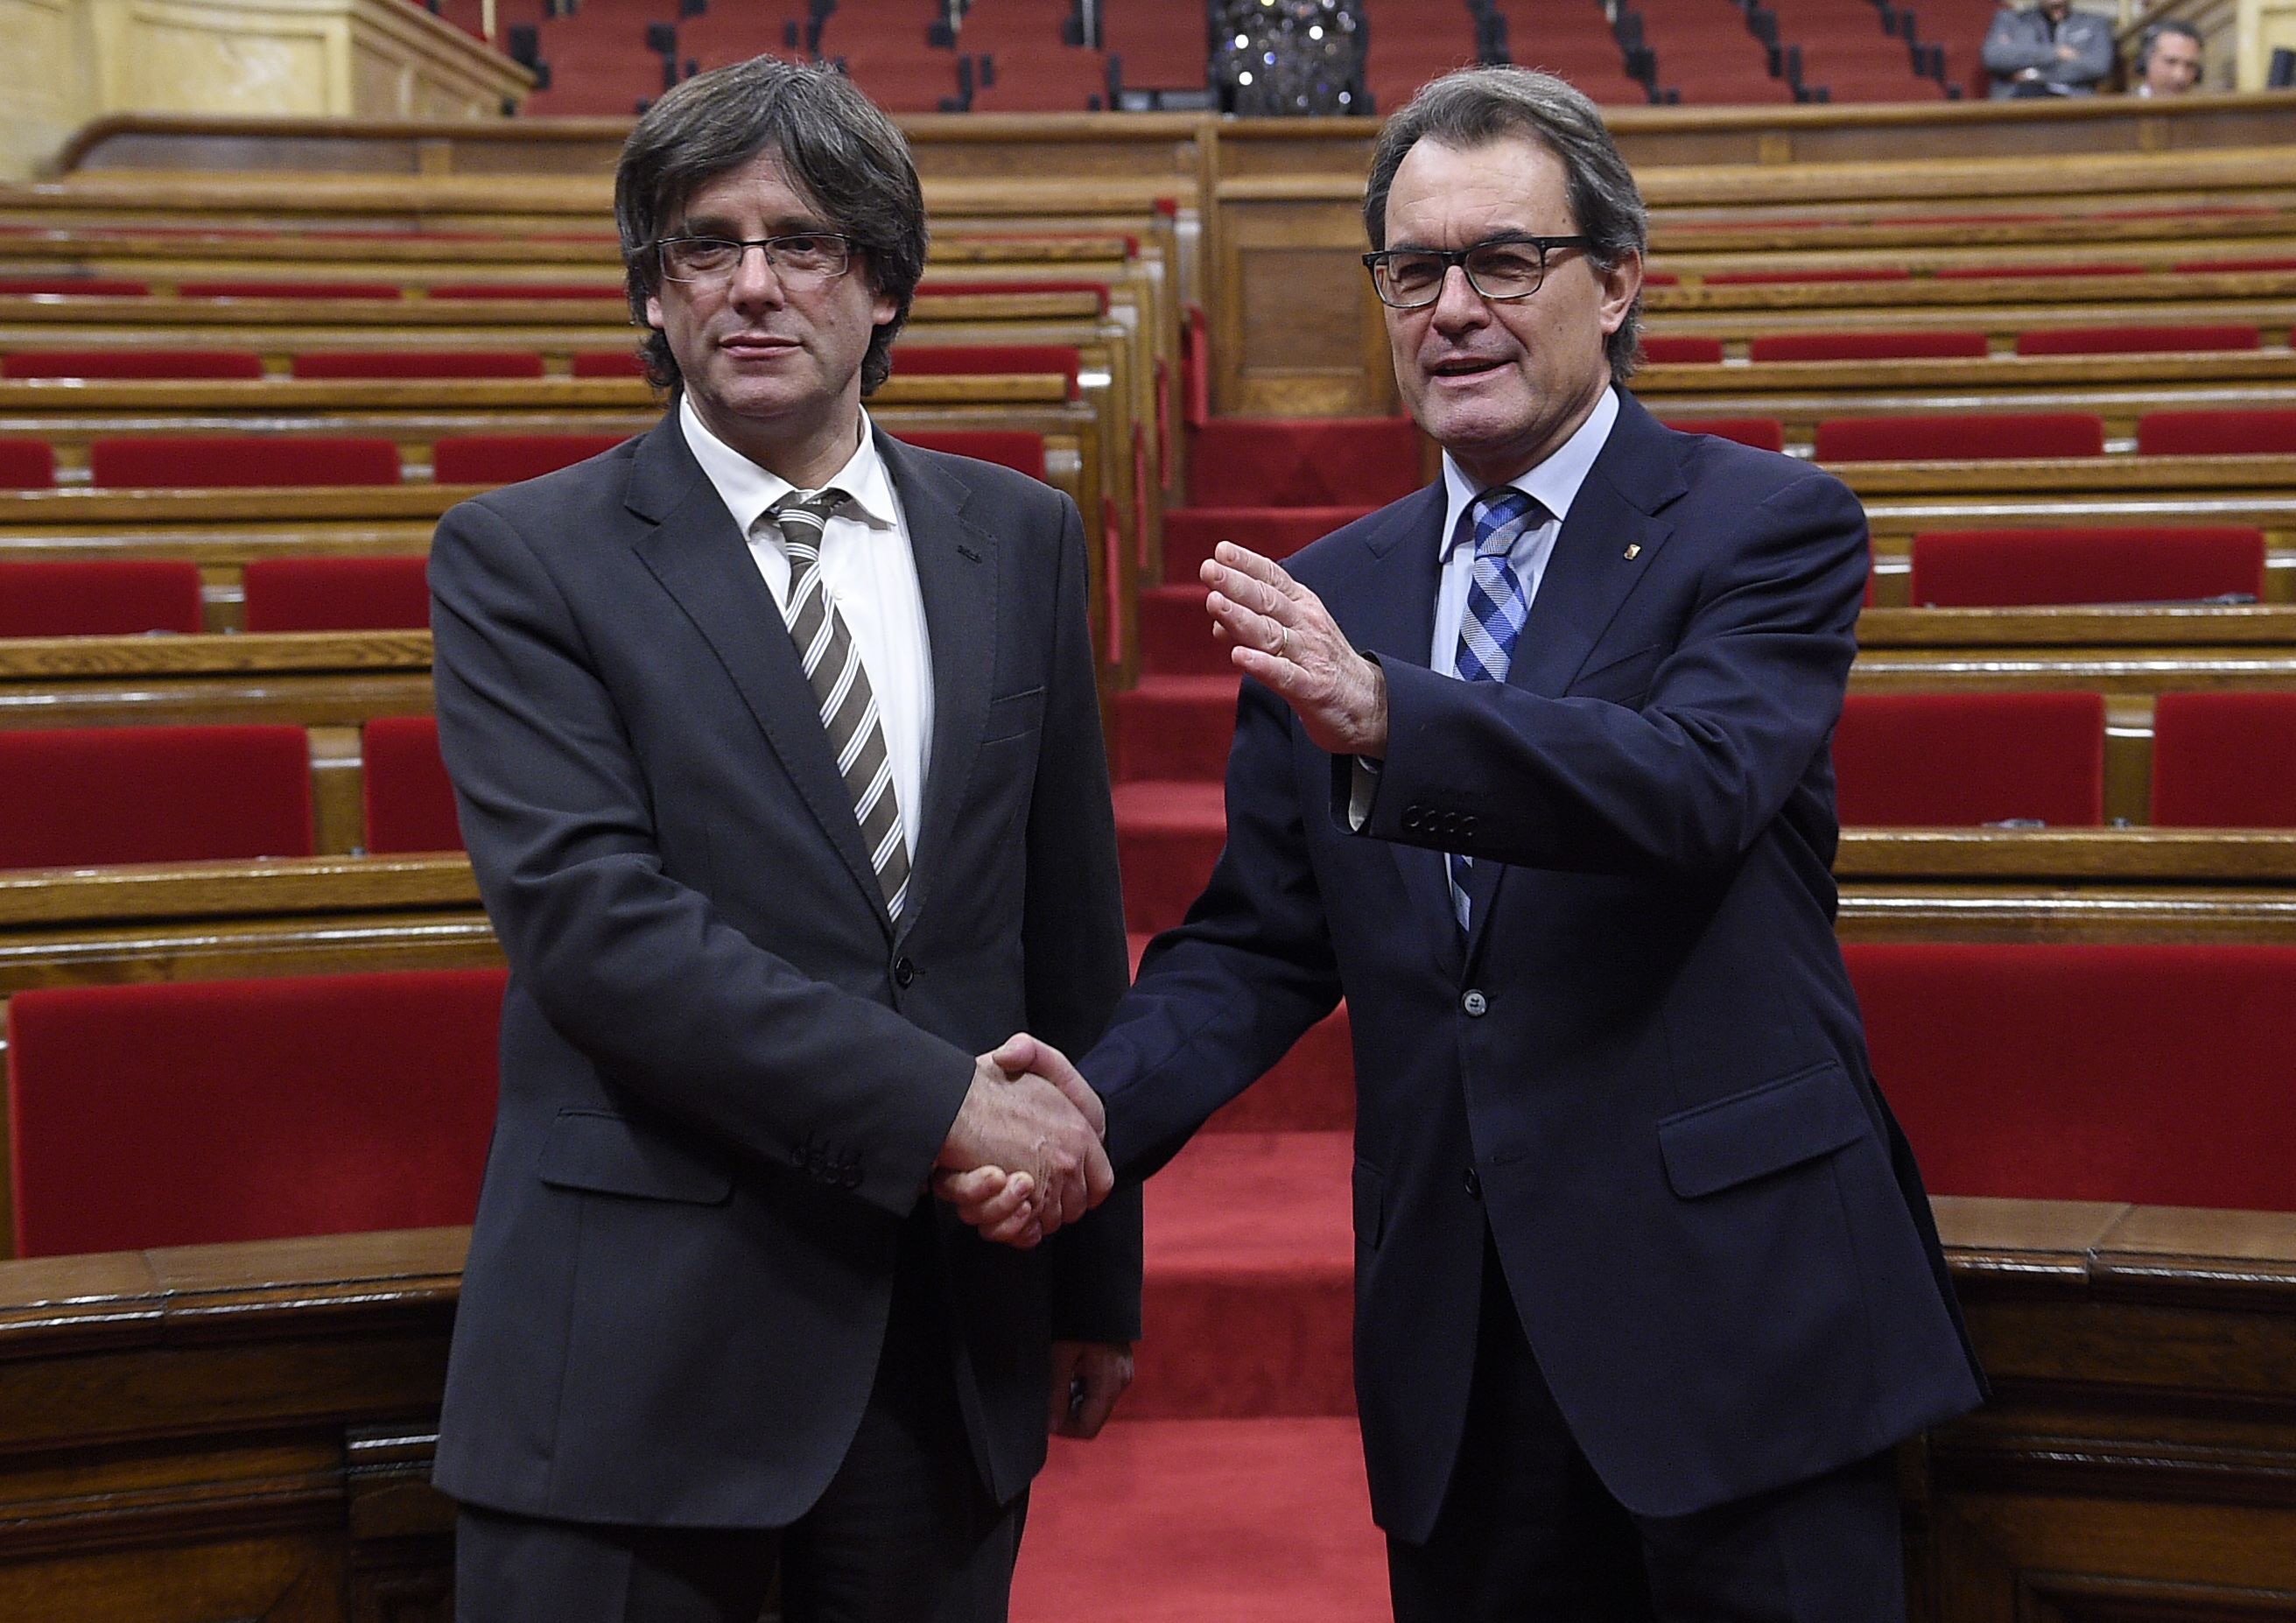 new elected president of the catalan government carles puigdemont l is congratulated by former president artur mas at the end of an investiture debate for the catalan government 039 s presidency at the parliament of catalonia in barcelona on january 10 2016 the majority secessionist lawmakers in catalonia 039 s parliament voted in a new leader today tasking him to oversee the wealthy region 039 s breakaway from spain in a last minute show of unity after months of bitter infighting carles puigdemont was elected regional president with 70 votes for 63 against and two abstentions giving catalonia 039 s high profile independence movement a fresh lease of life photo afp